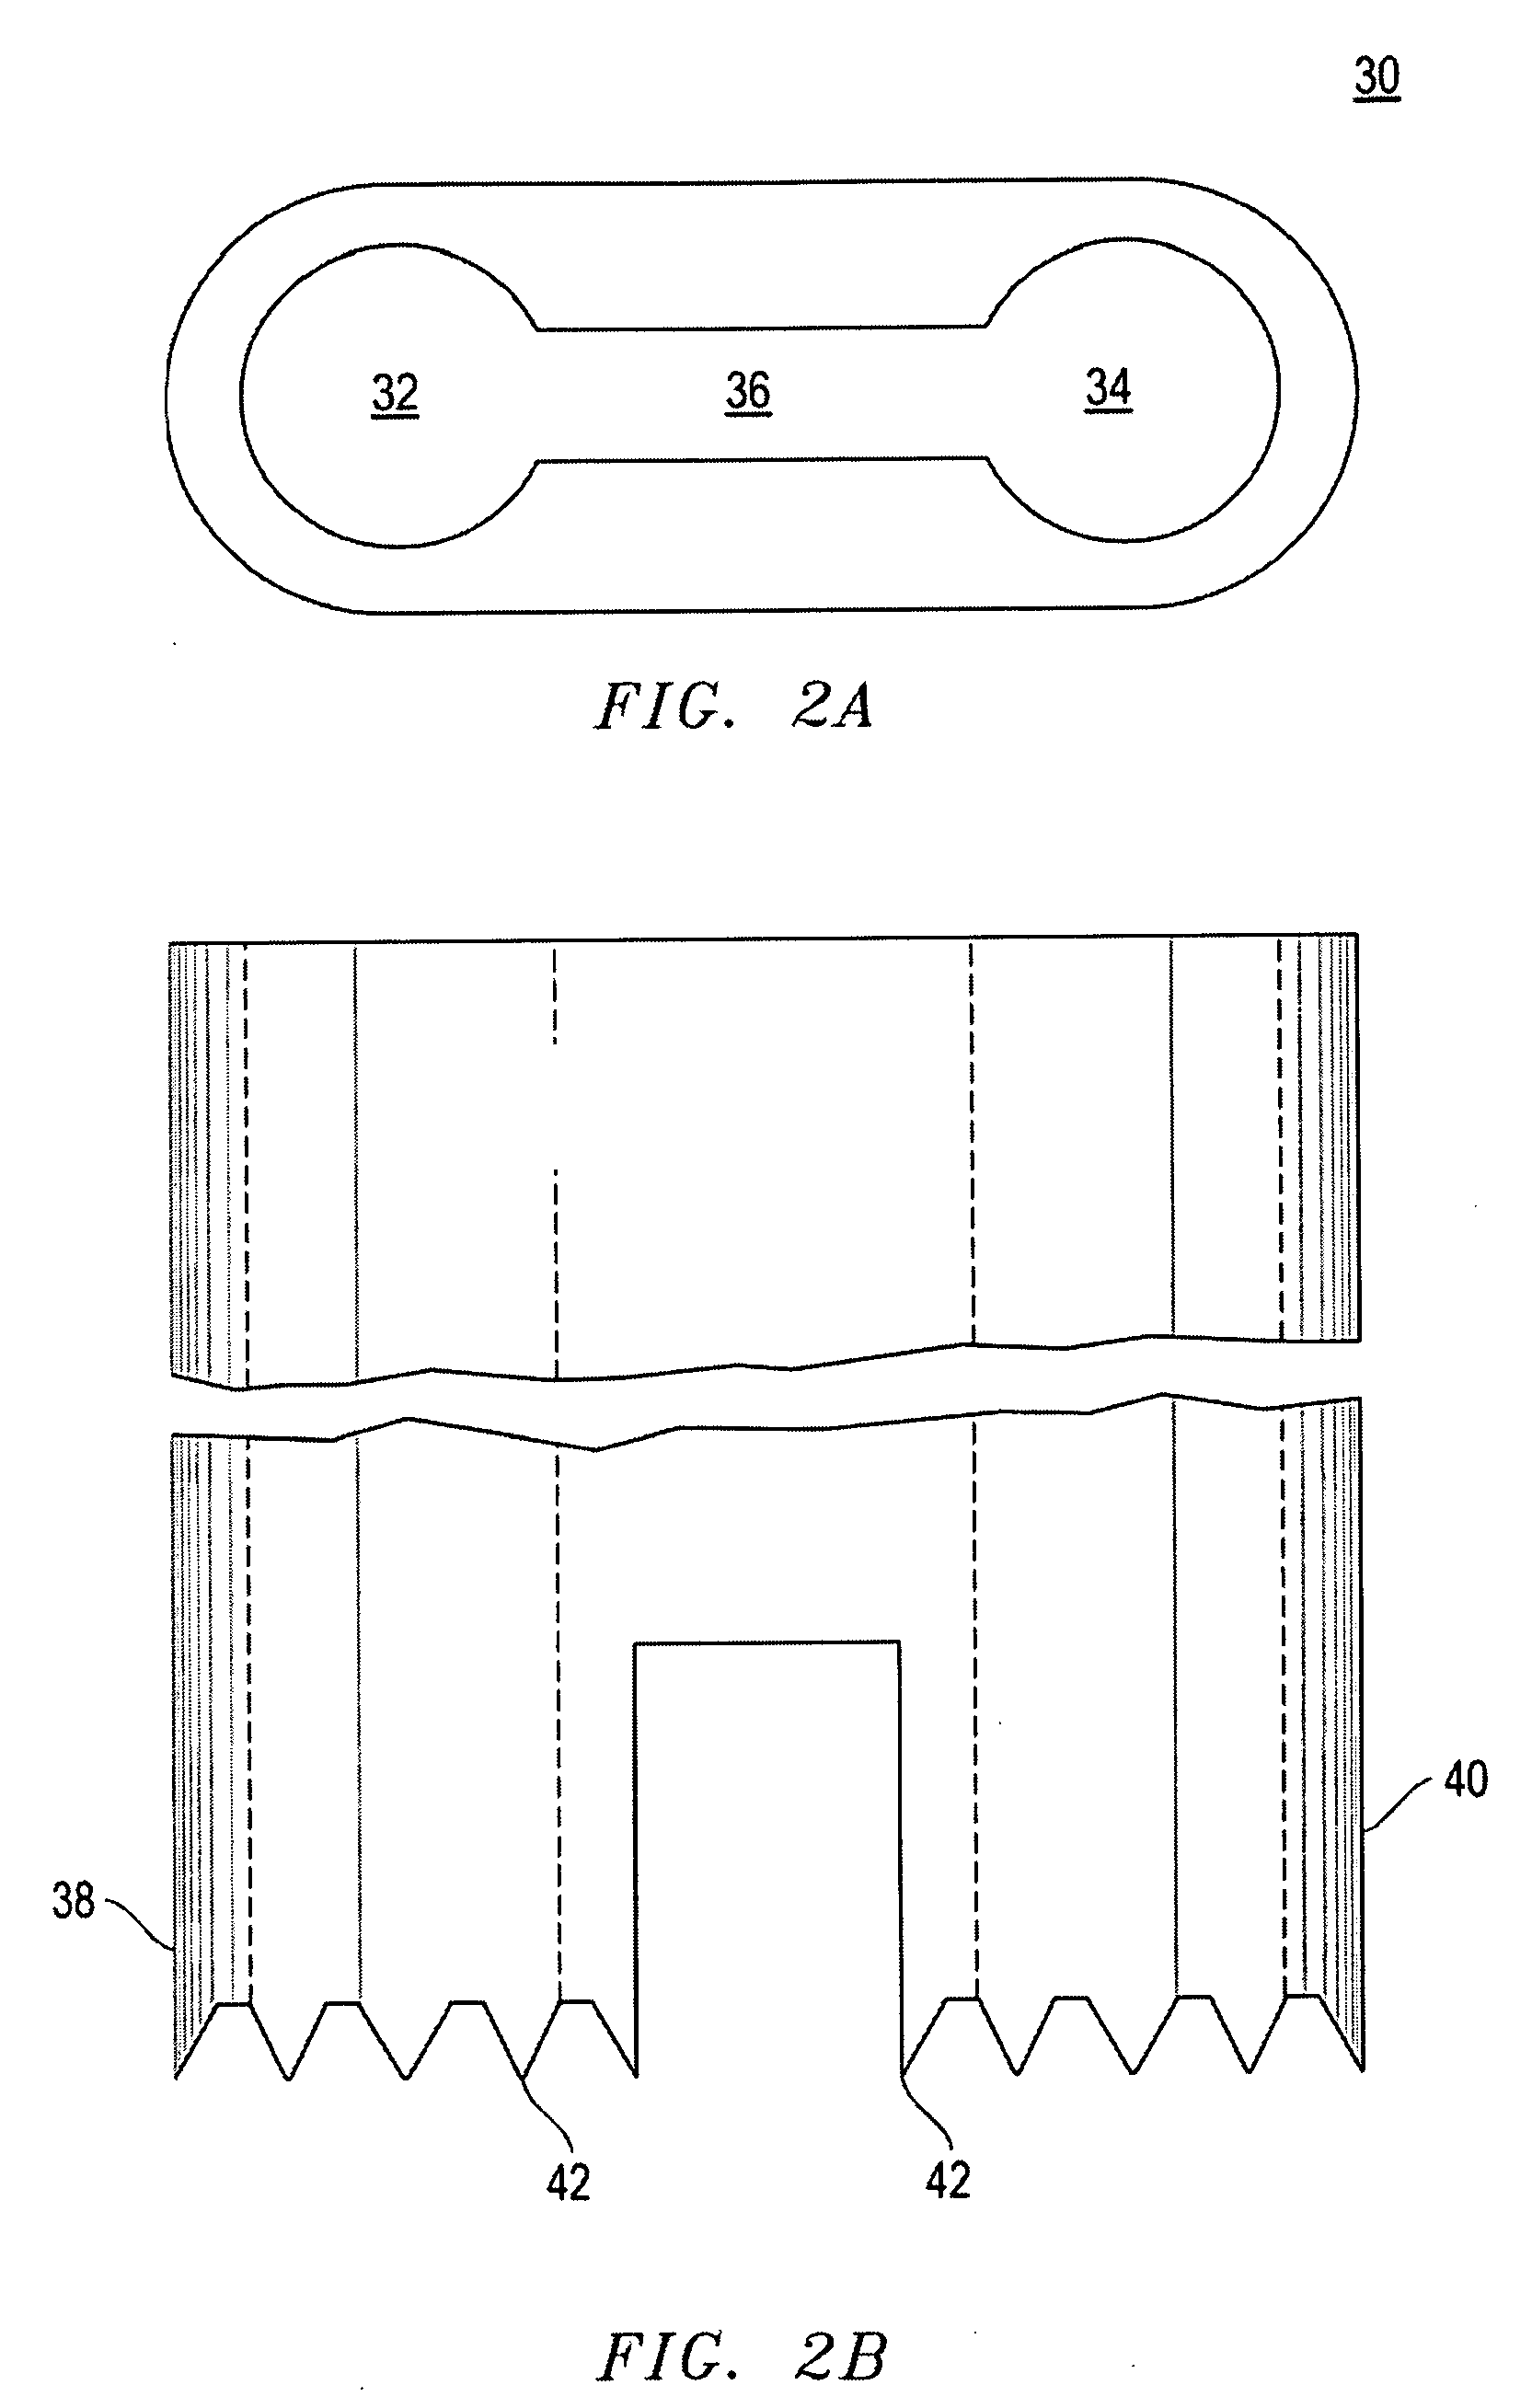 Kit Containing Combination Absorbable Staple and Non-absorbable Suture, And Method Of Using Same